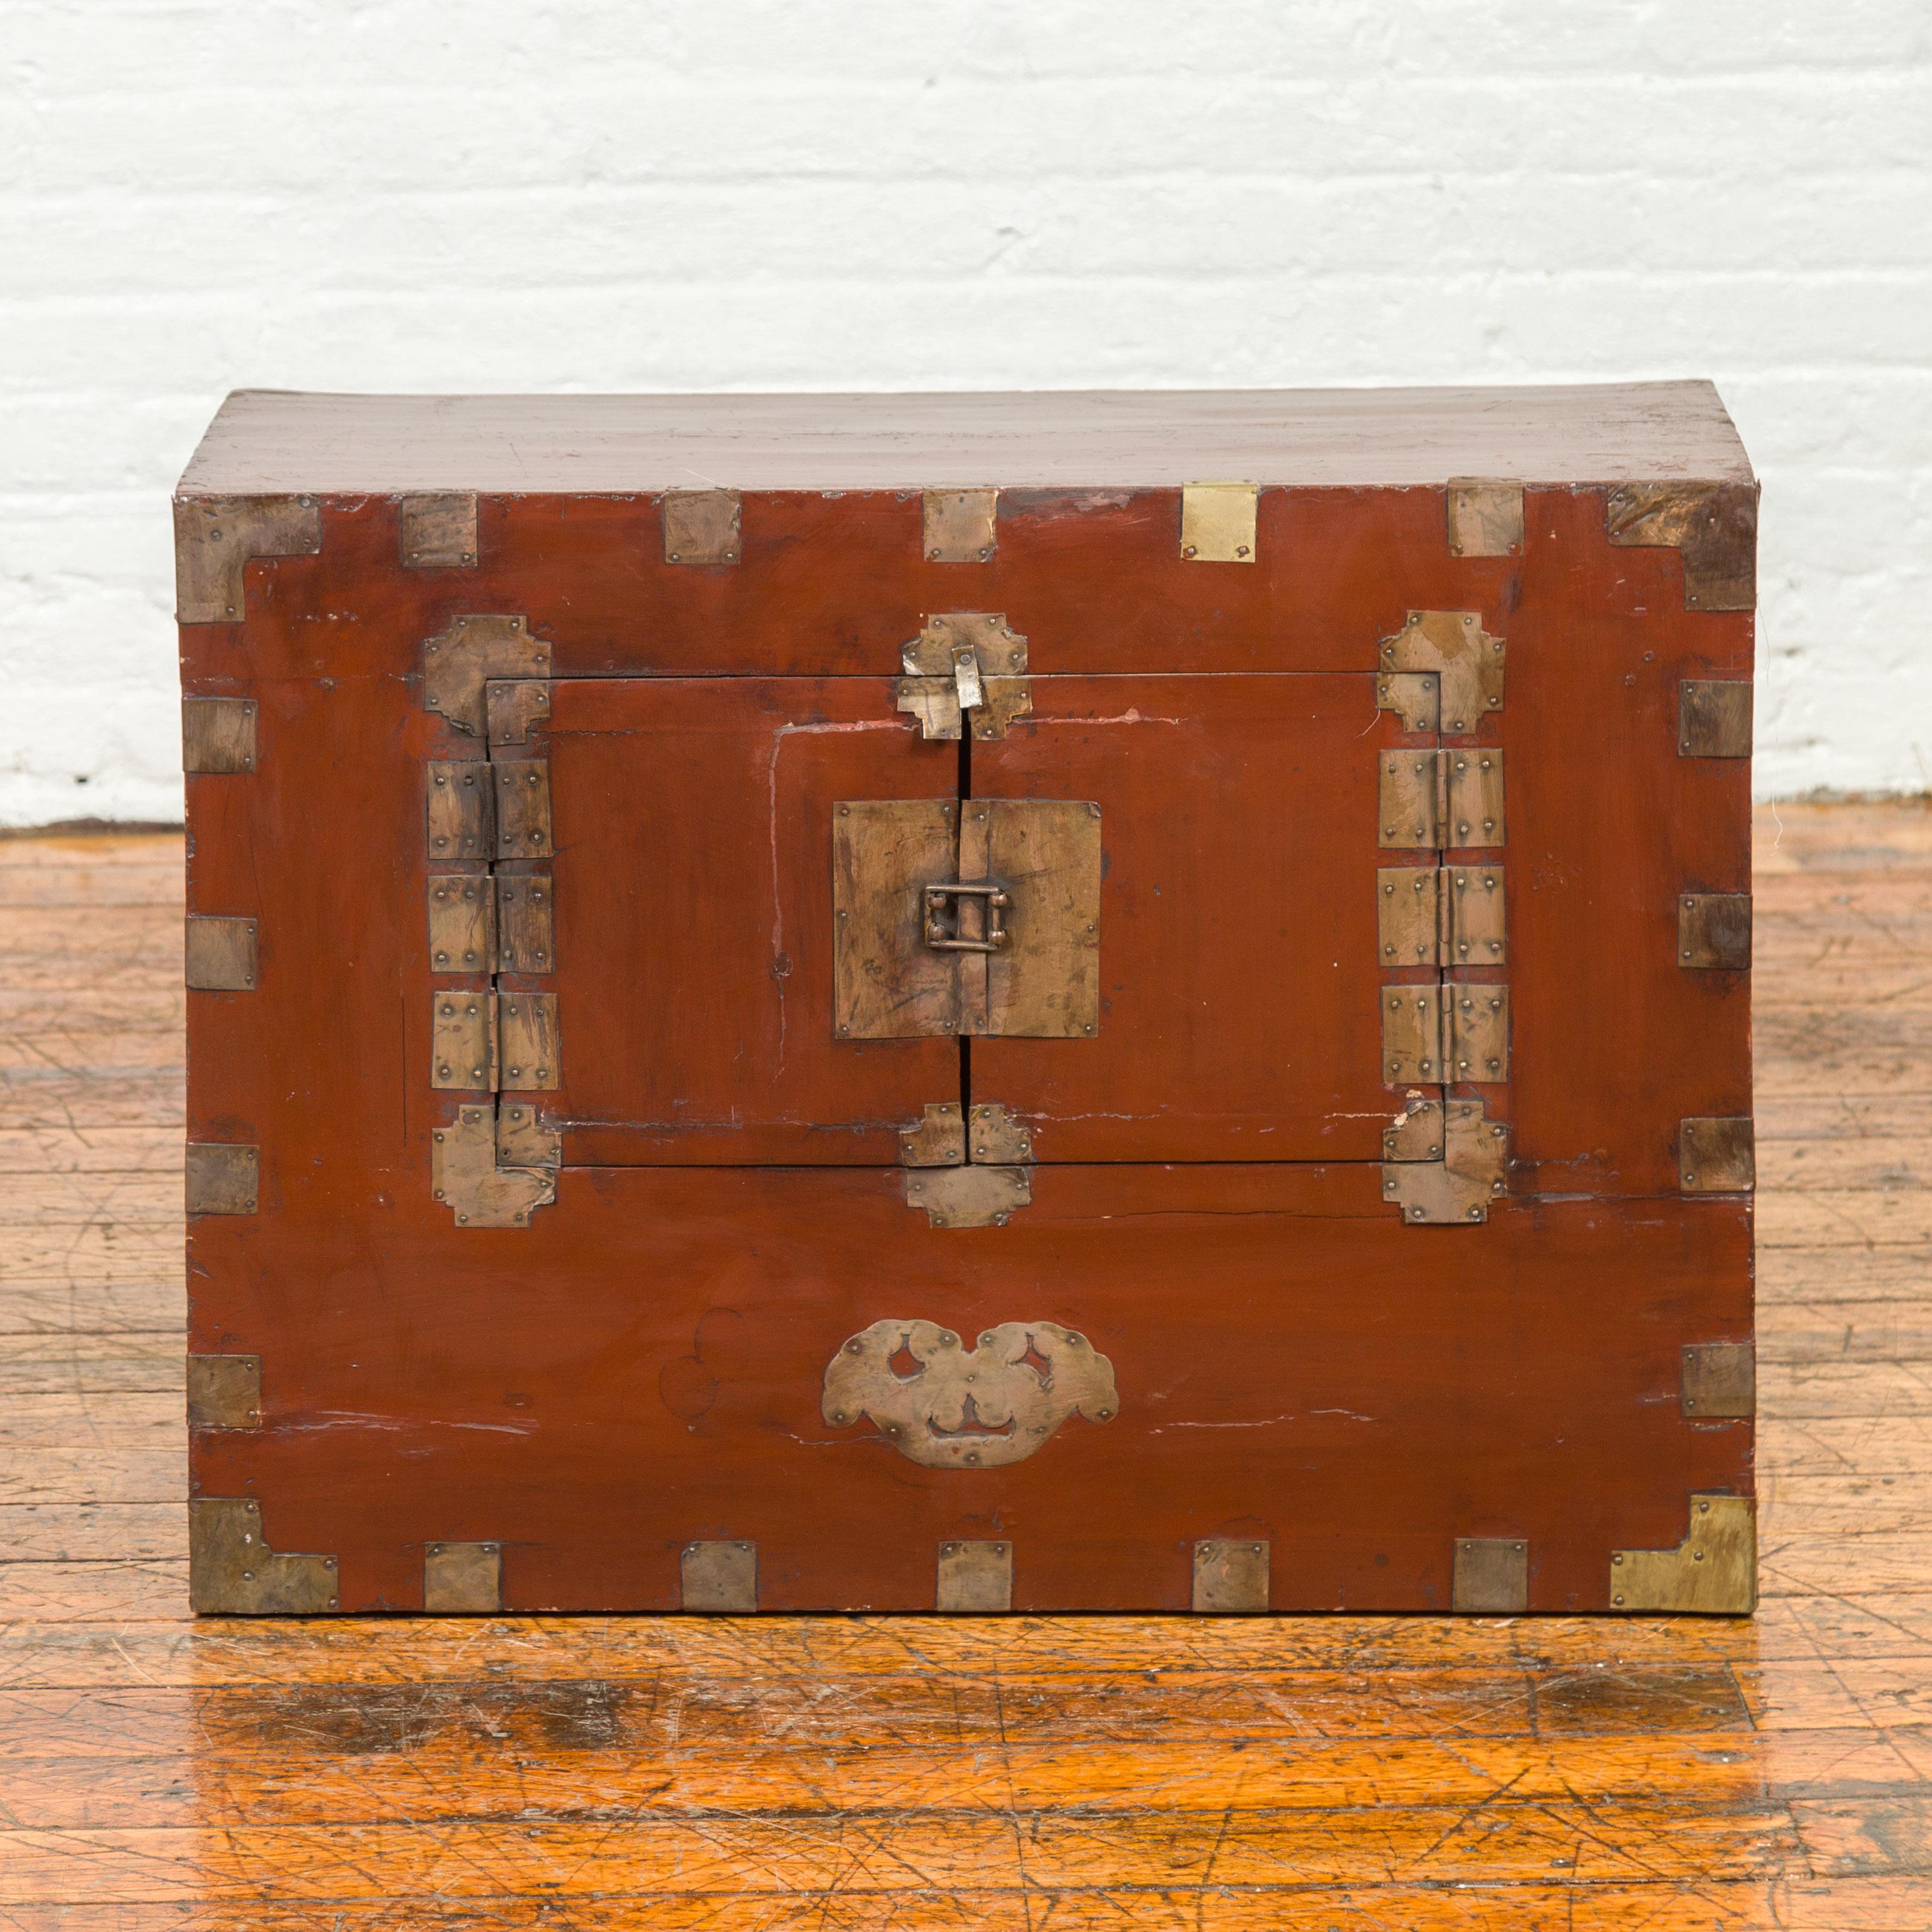 An antique Korean side chest from the early 20th century, with petite double doors and traditional brass hardware. Crafted in Korea in the early 20th century, this antique side chest marries form with function in an exquisite display of traditional